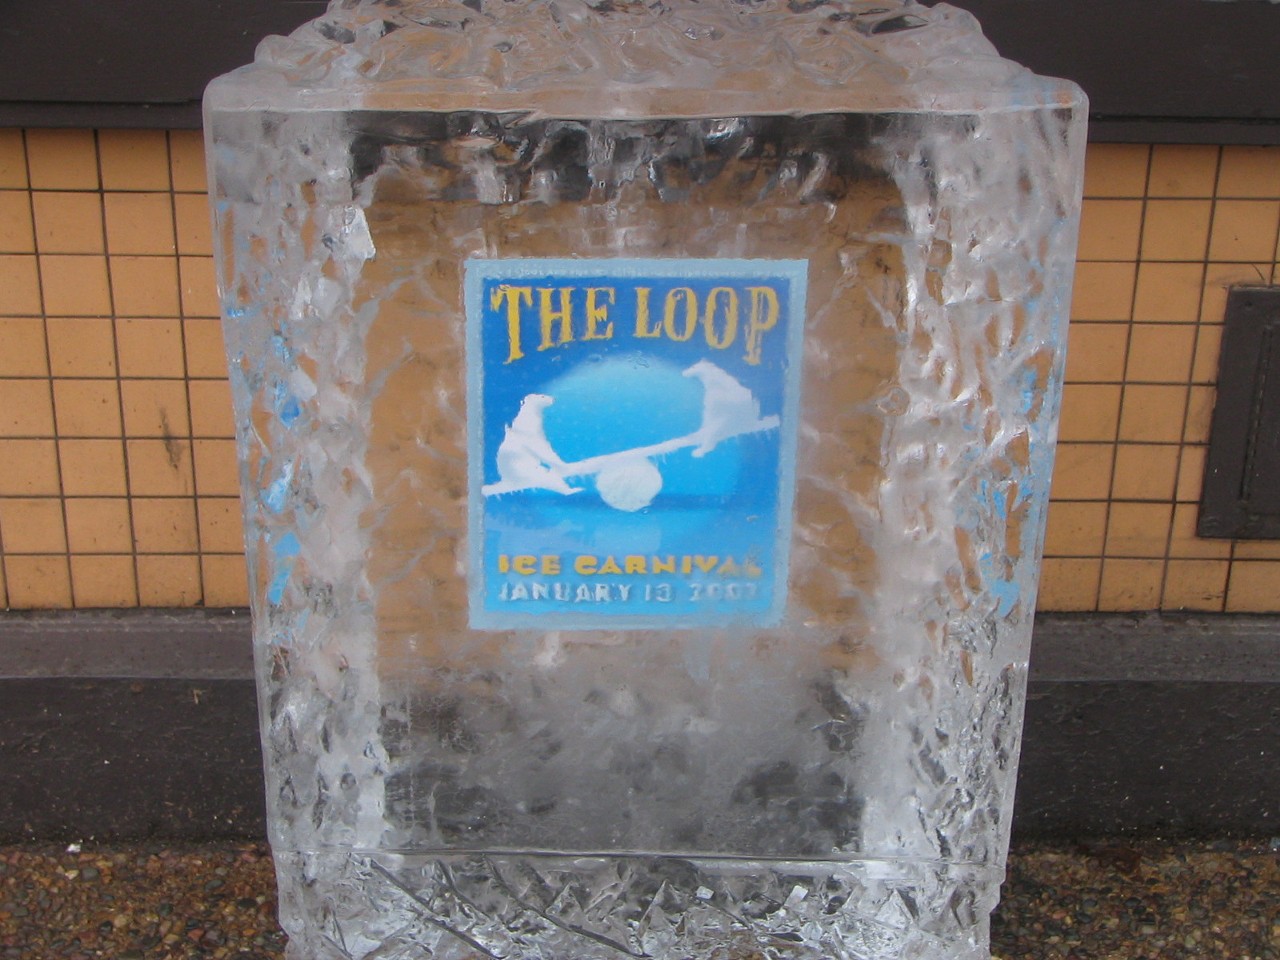 The Loop Ice Carnival